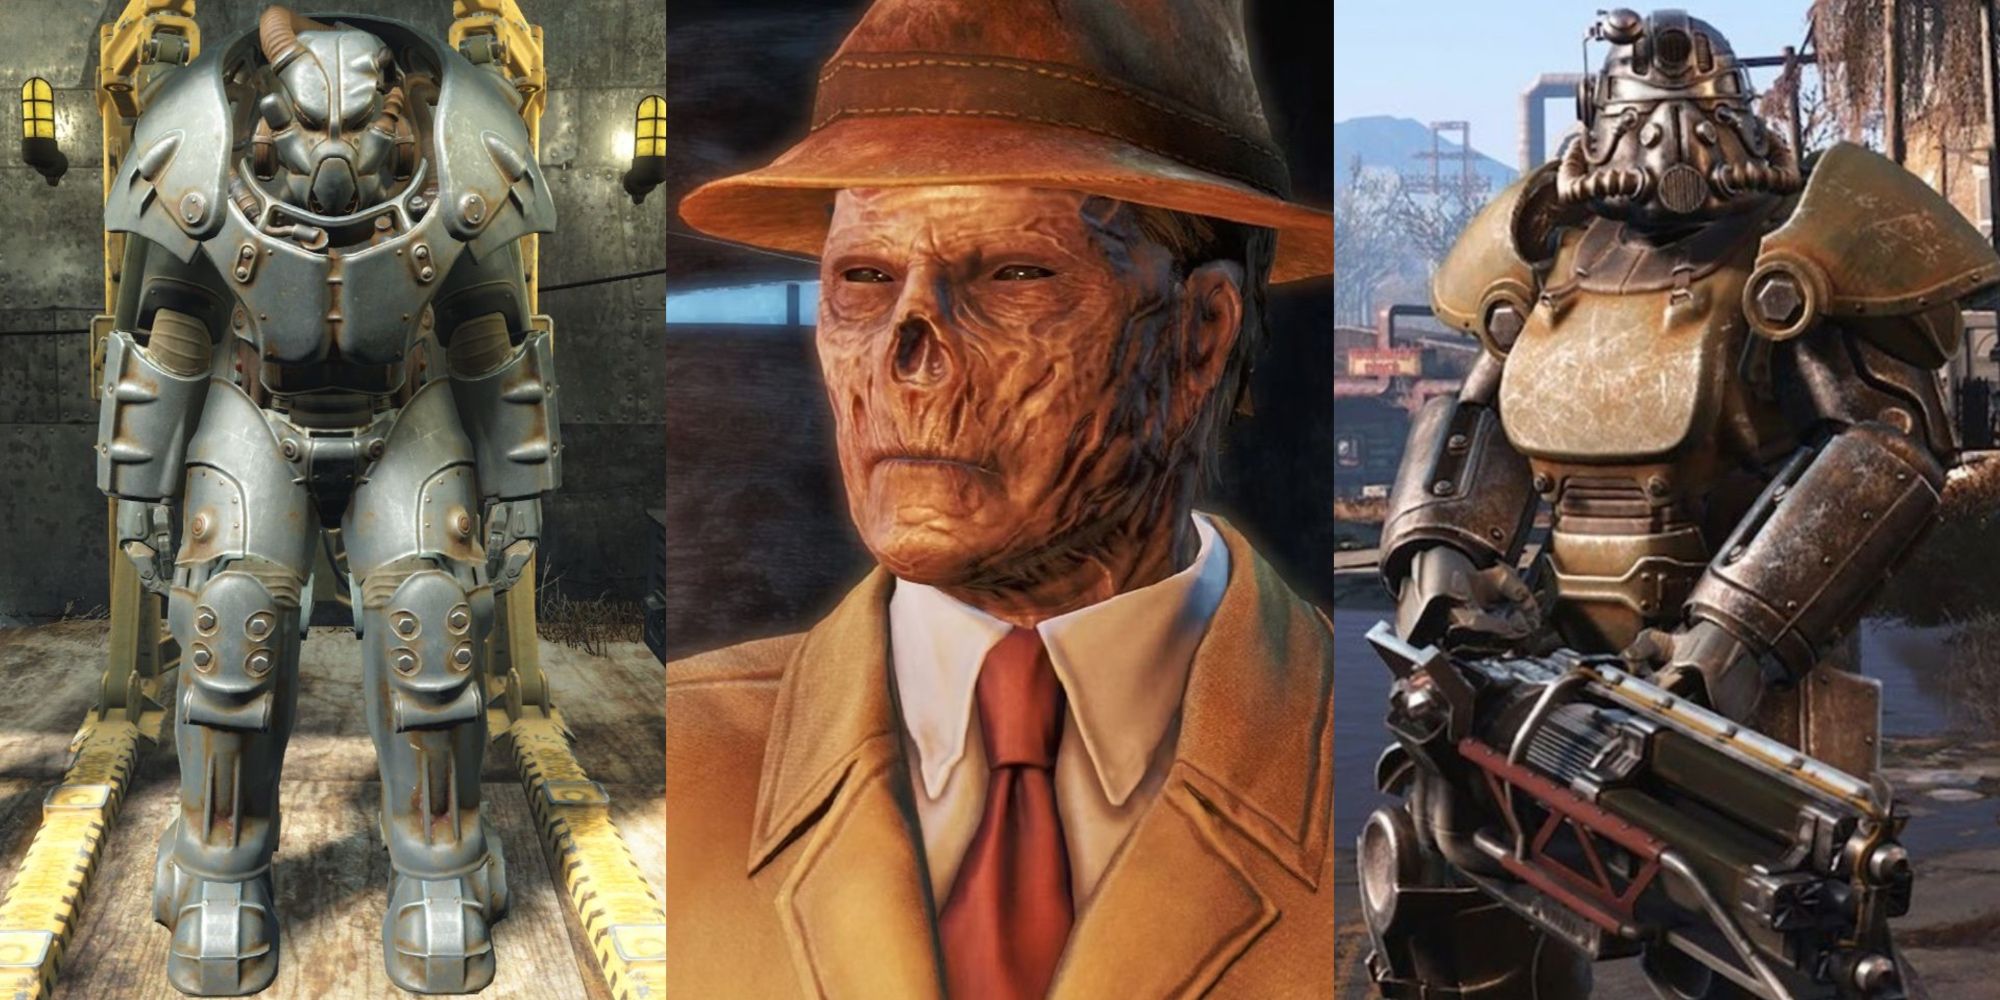 A split image of Power Armor, a Ghoul wearing a detective's outfit, and someone in Power Armor holding a Gatling Gun in Fallout 4.